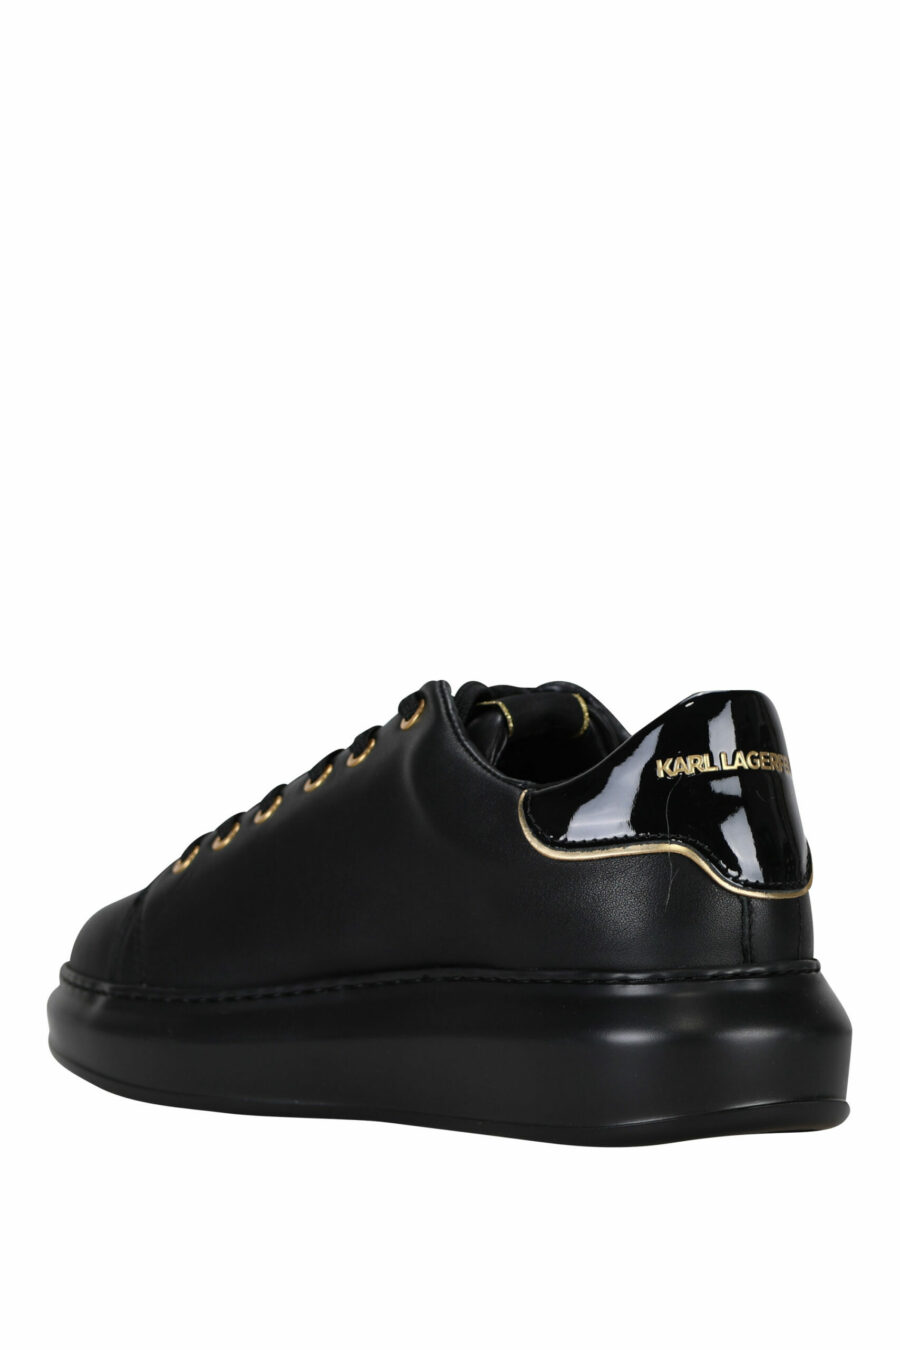 Black trainers with golden "rue st guillaume" logo in metal - 5059529362699 3 scaled